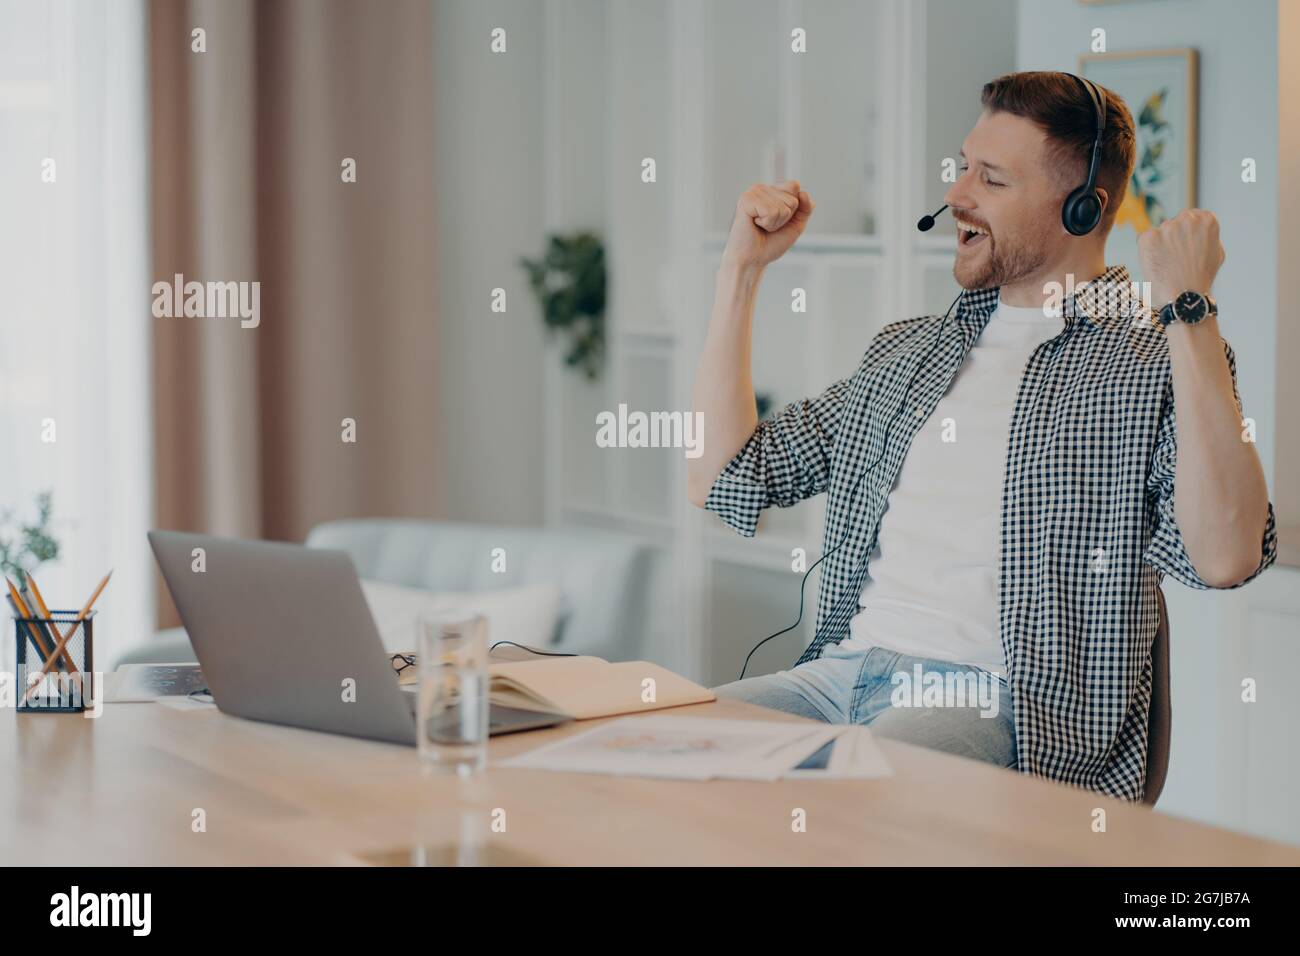 Happy successful man clenches fists celebrates triumph works online wears headset poses at desktop with laptop computer dressed casually. Overjoyed Stock Photo